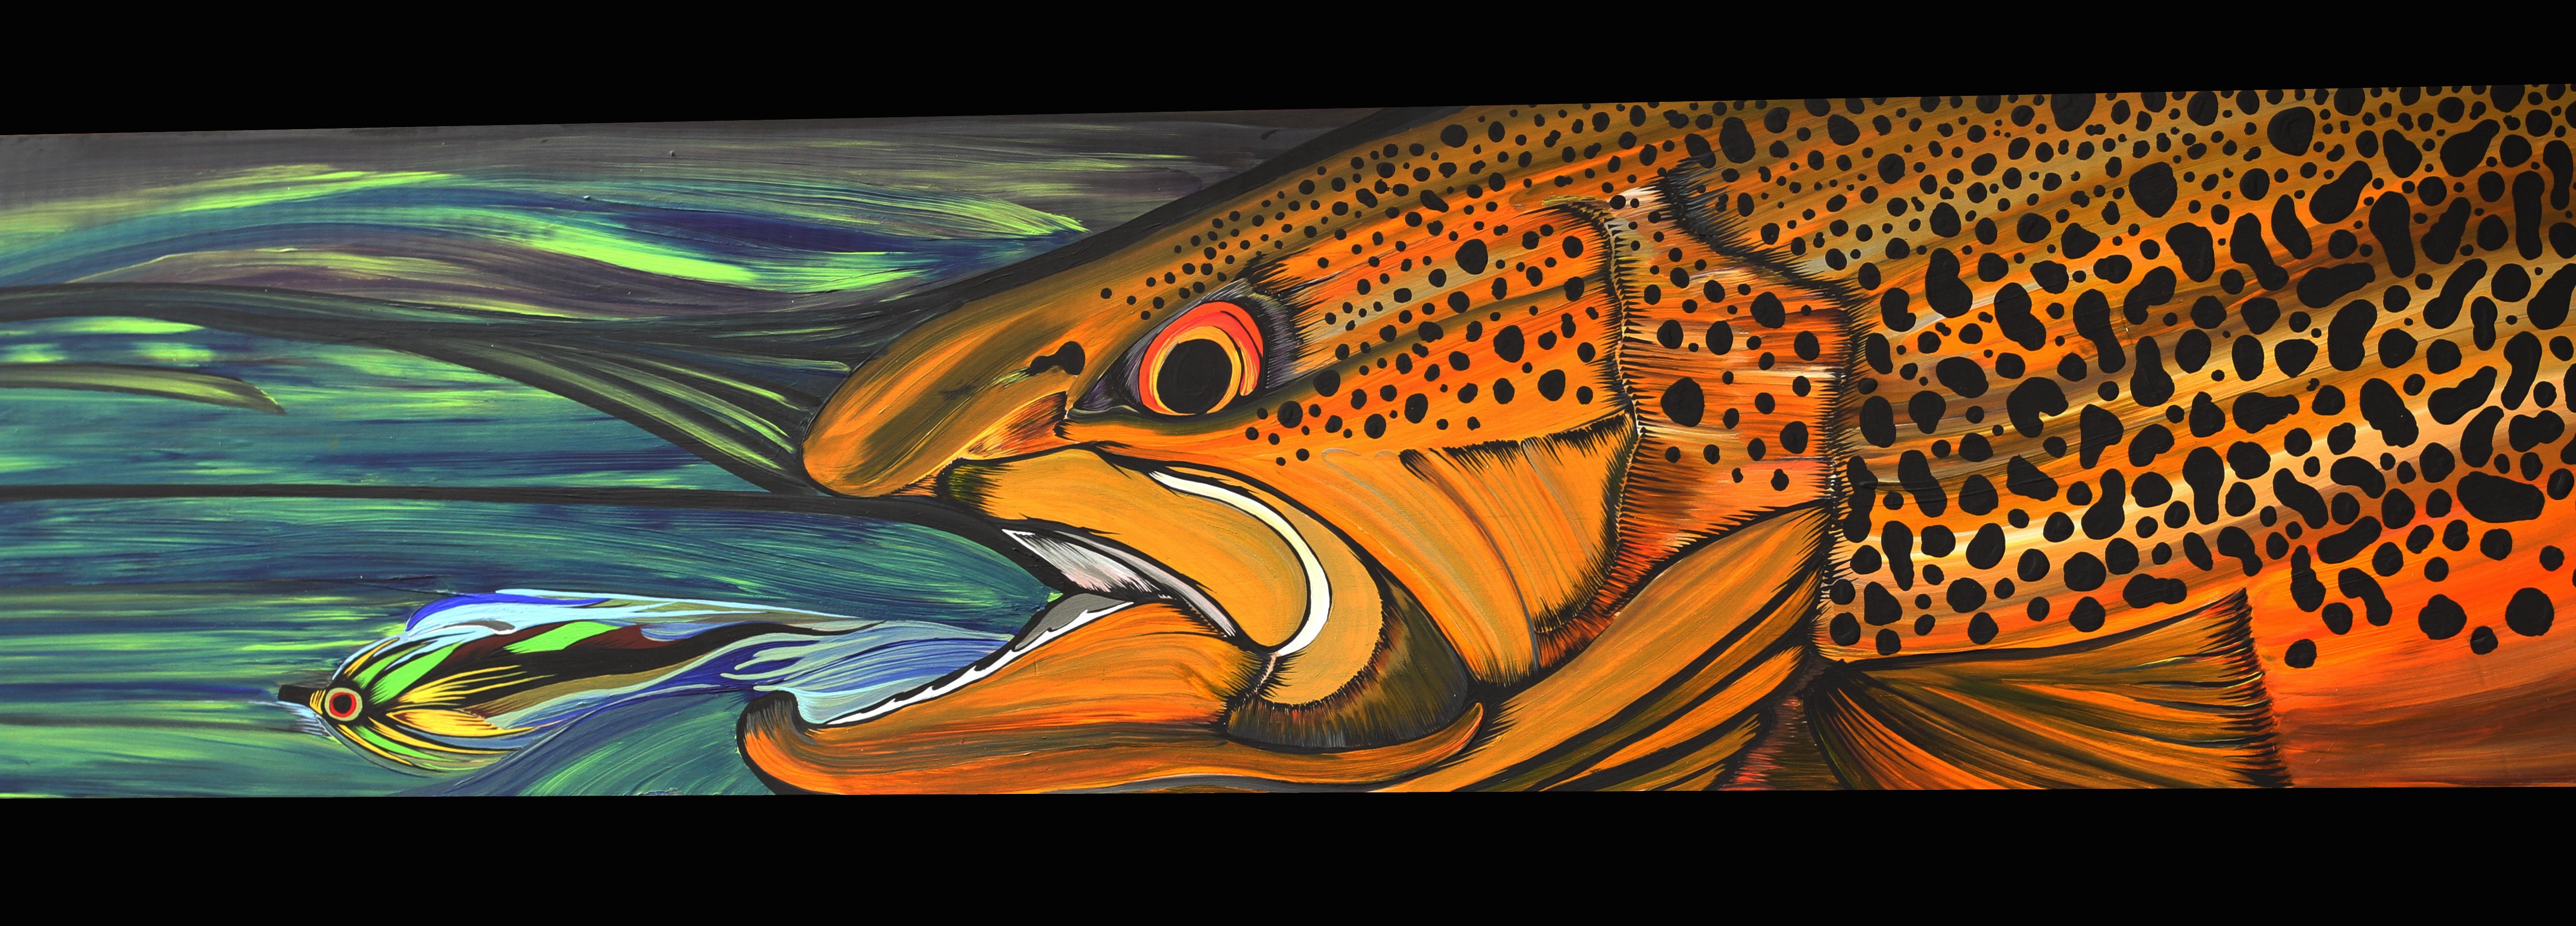 Fishing Fish Sport Fishes Bass Trout Artwork Painting Wallpaper